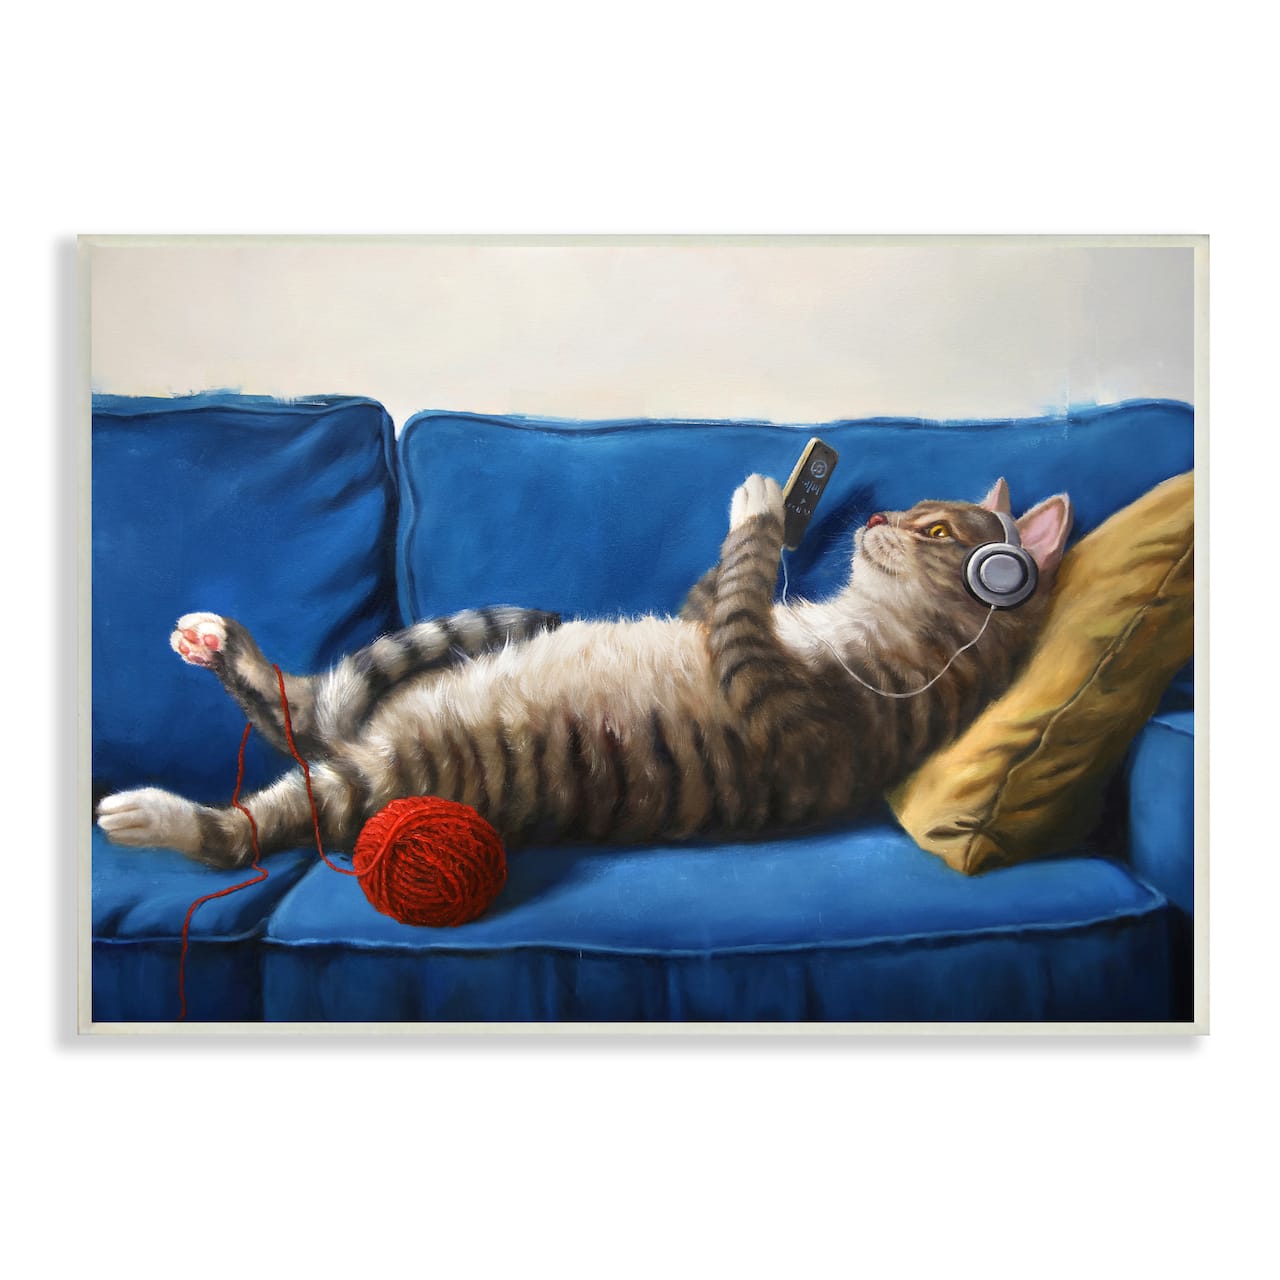 Stupell Industries Cat Couch Relaxing Red Yarn Ball Pet Portrait Wall Plaque